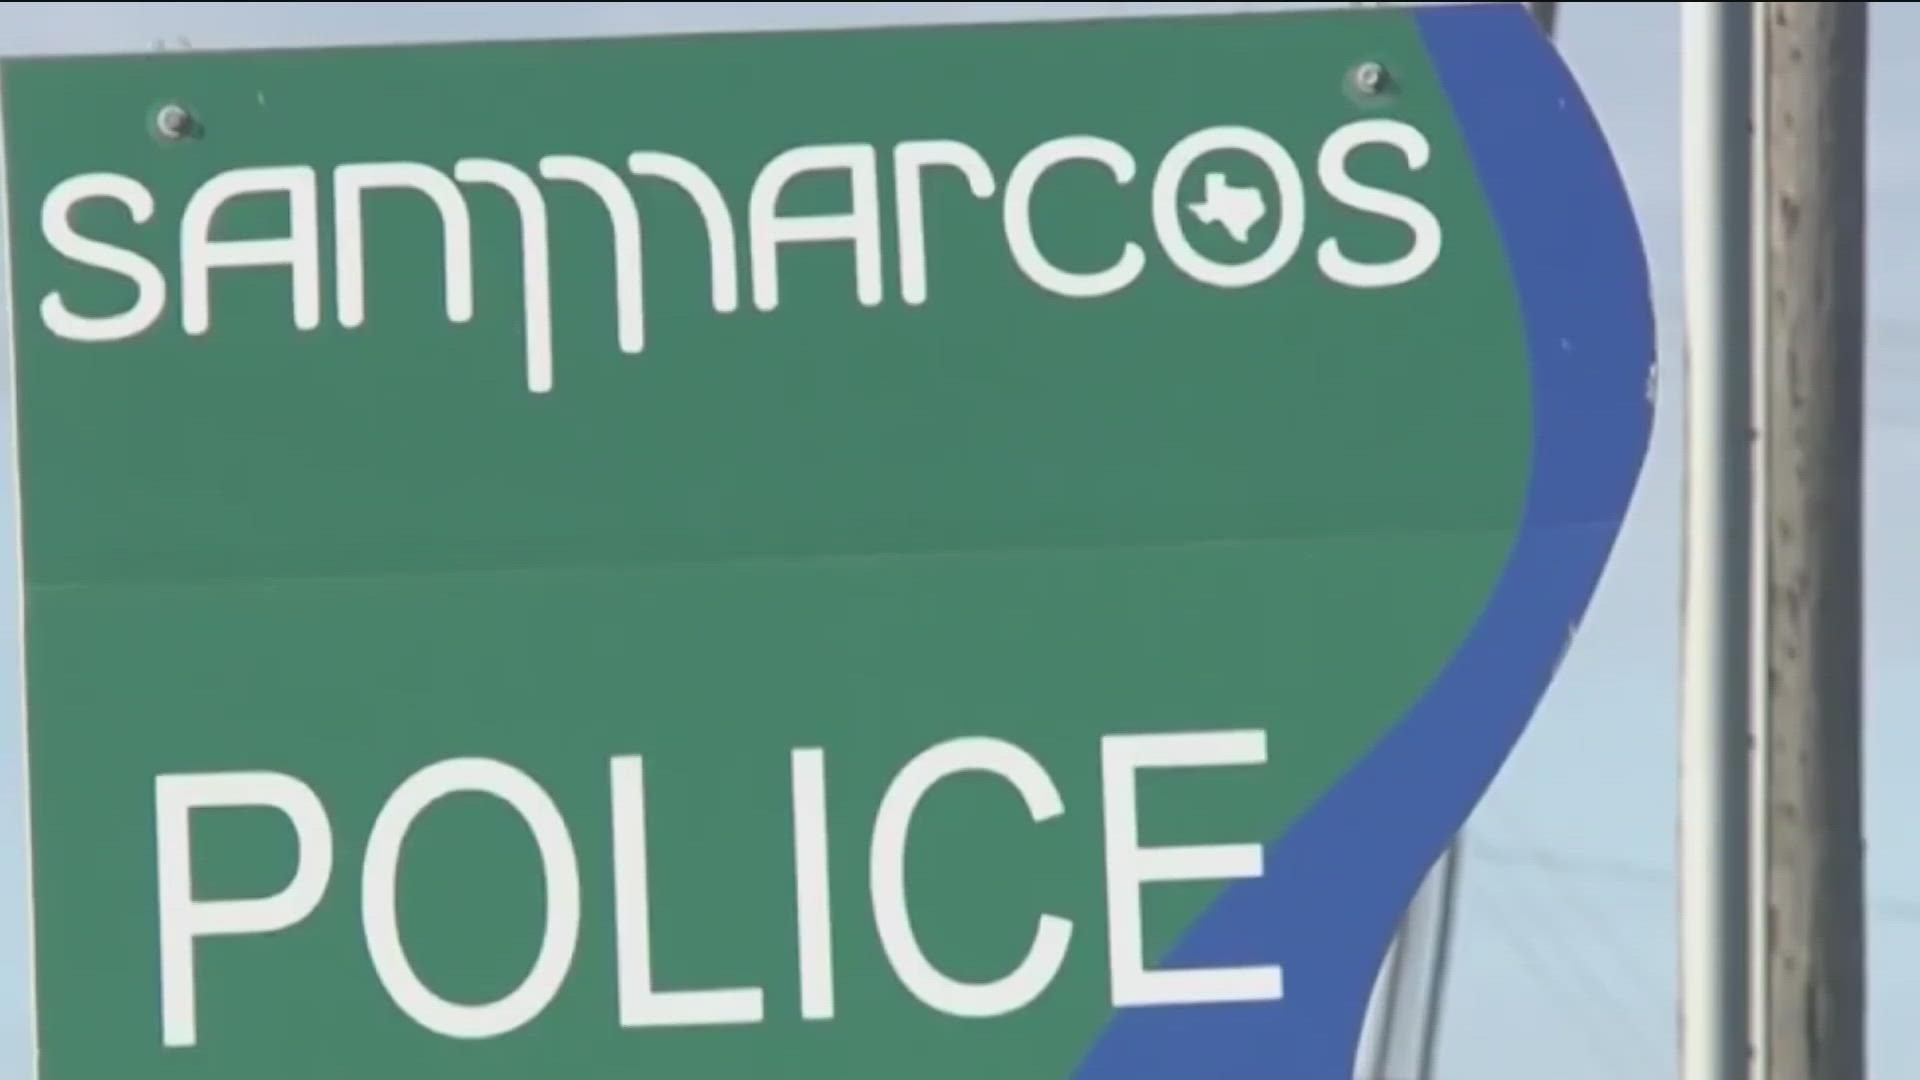 San Marcos City Council members voted 4-3 to repeal an agreement with the city police officers' association.